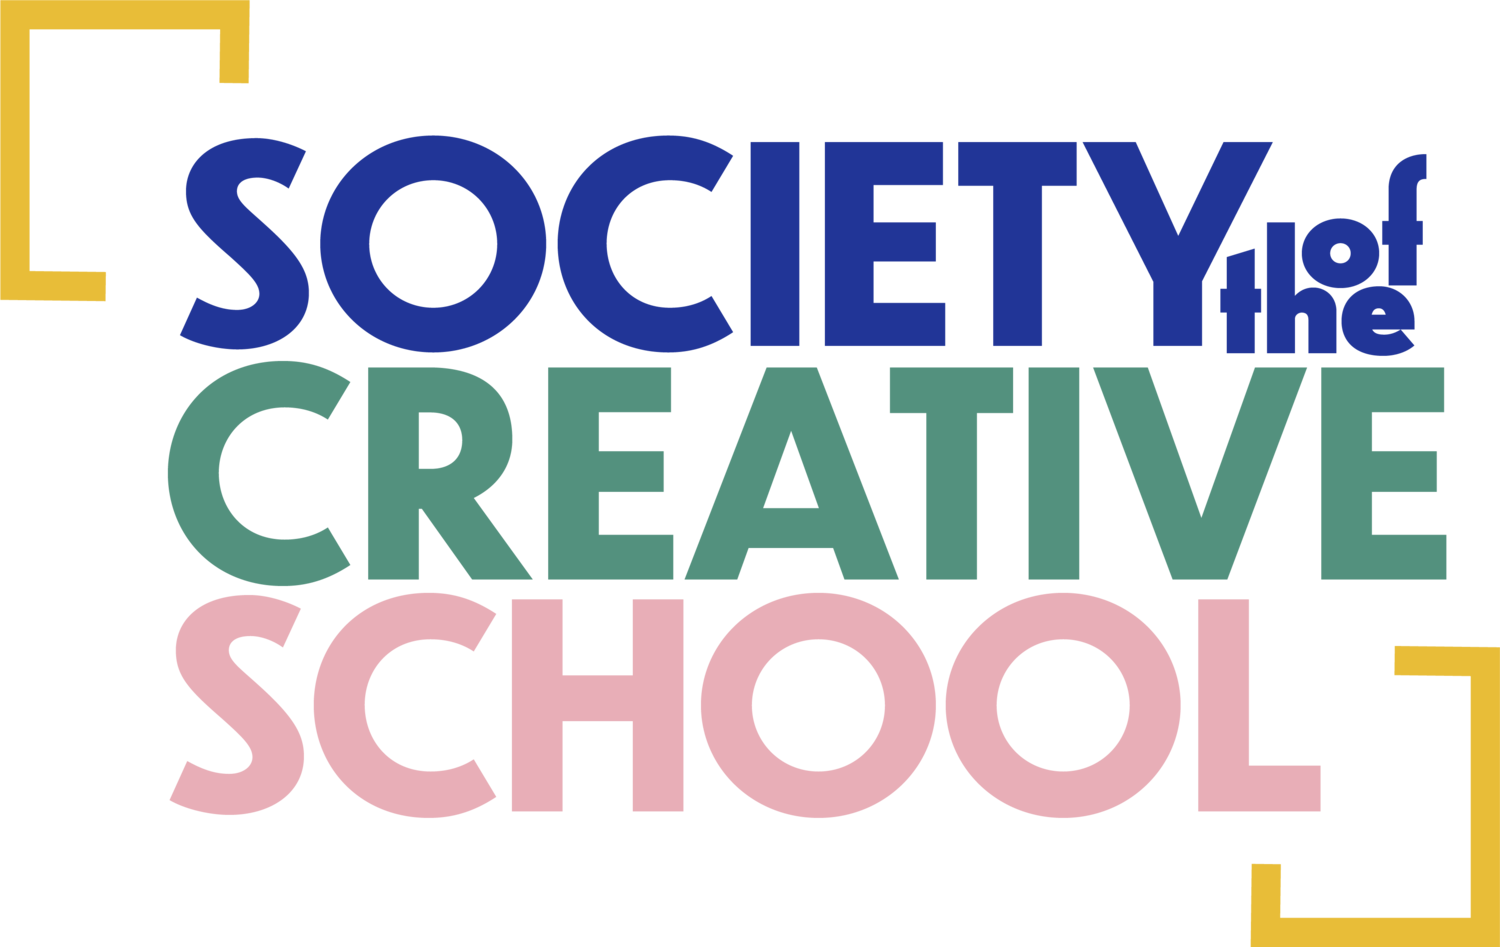 The Society of the Creative School